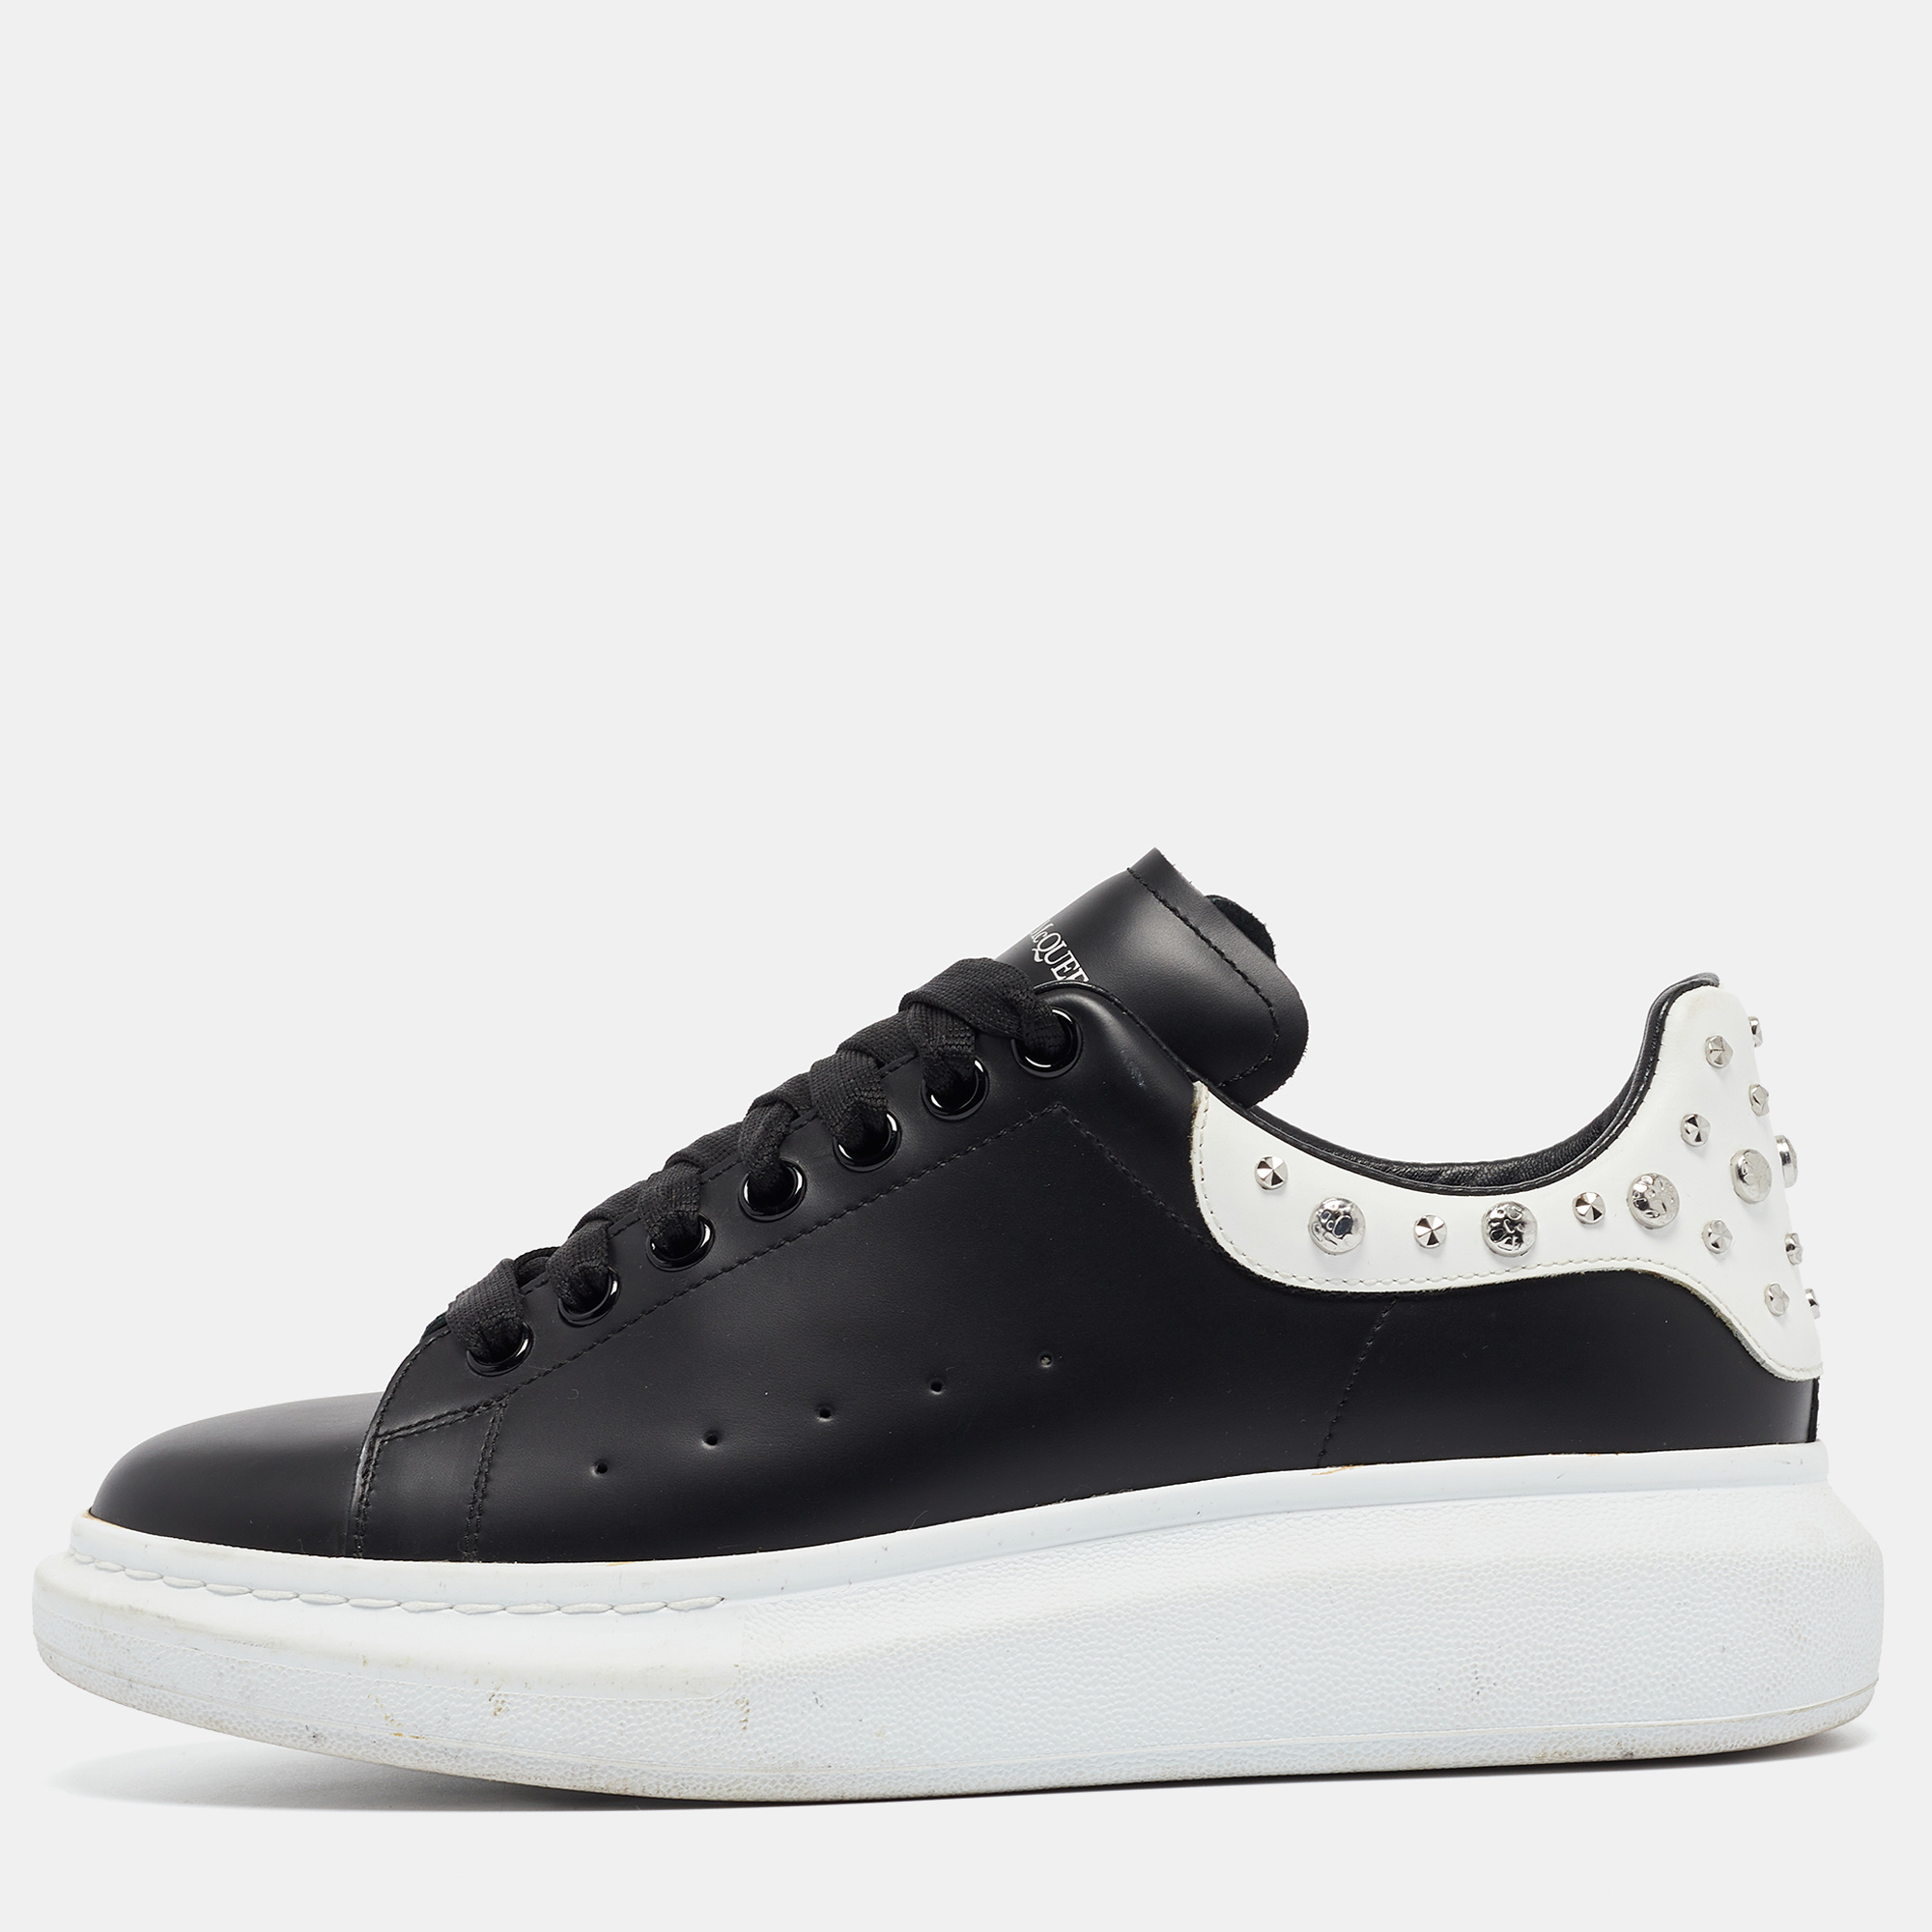 

Alexander McQueen Black/White Leather Oversized Studded Sneakers Size